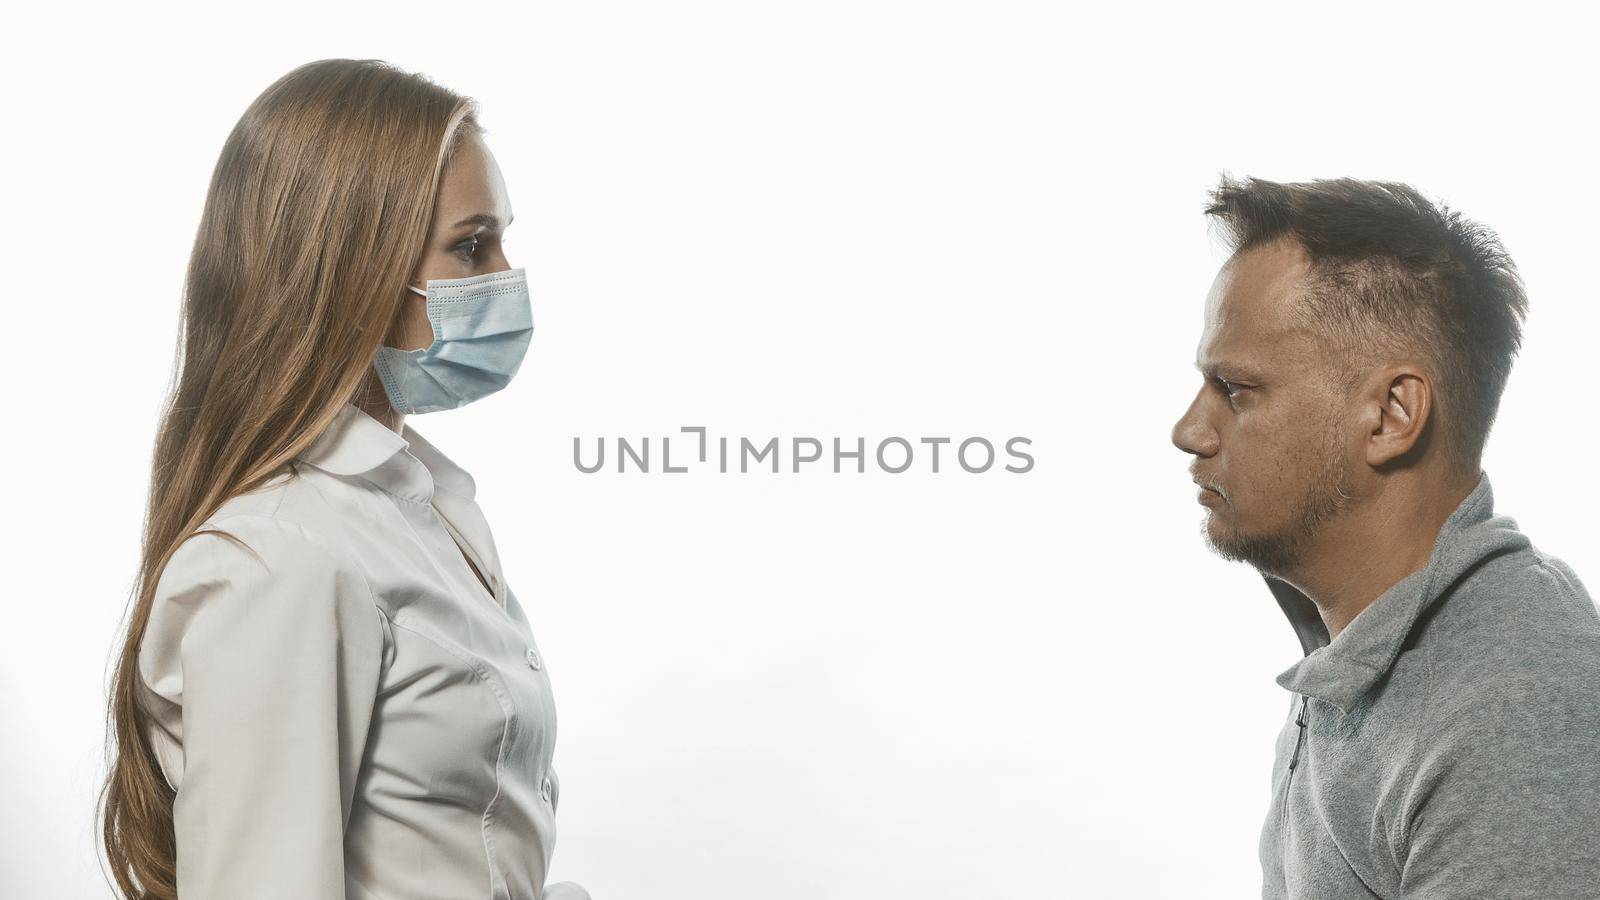 Medic looking at male patient who came for tests wearing a medical face mask. Sad man looking at her with sad eyes. Isolated on white background. Tinted image.